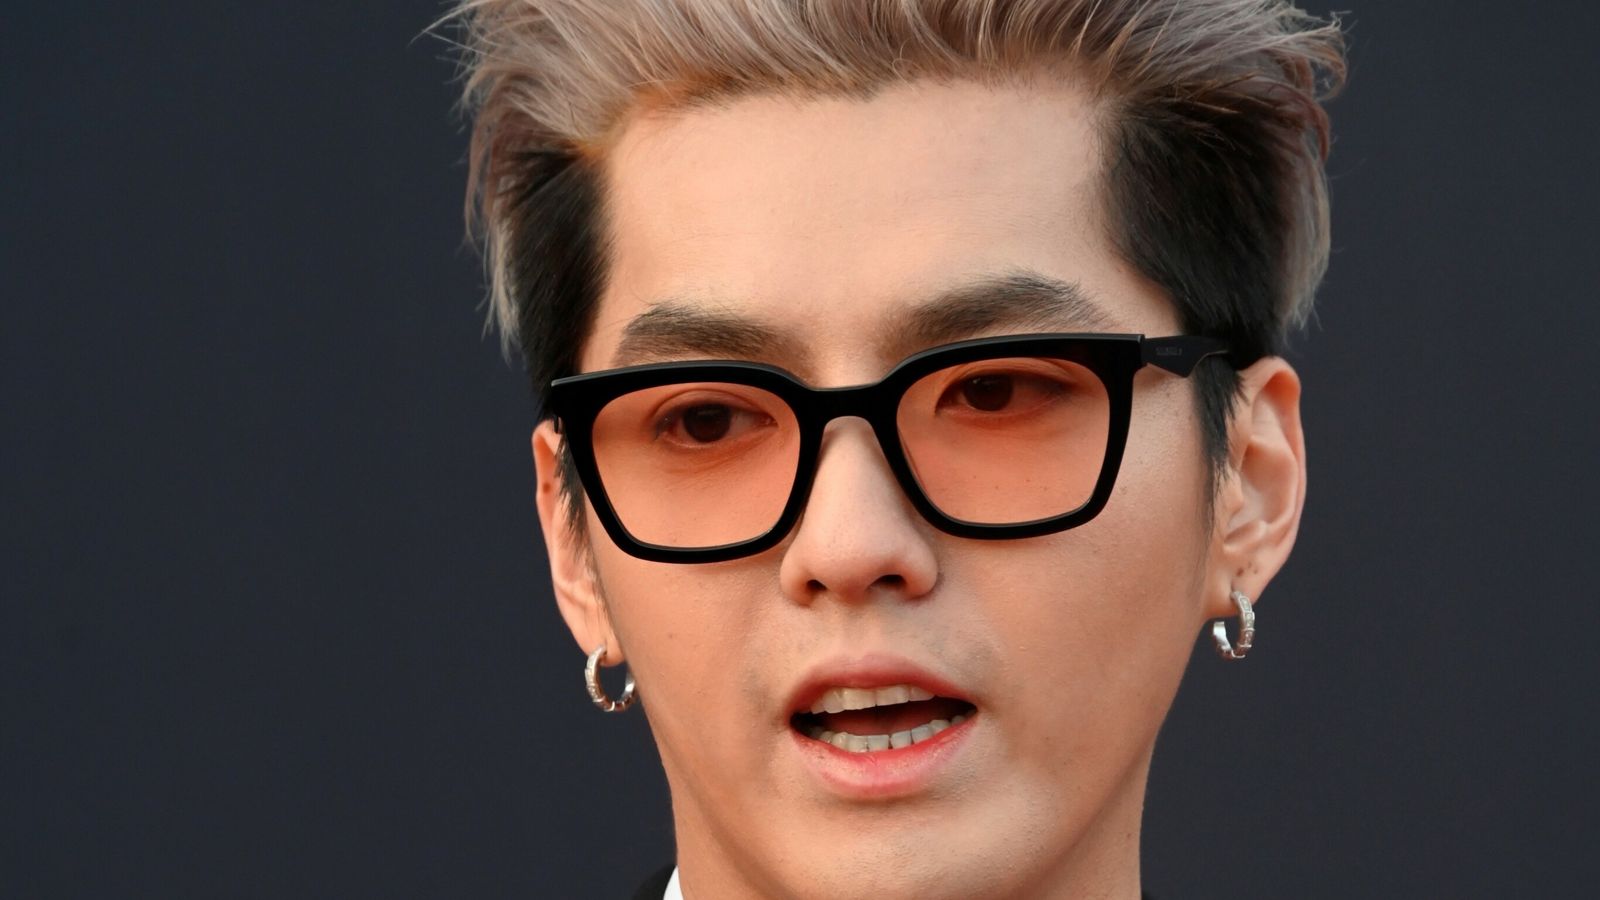 Singer Kris Wu denies luring underaged girls with acting and